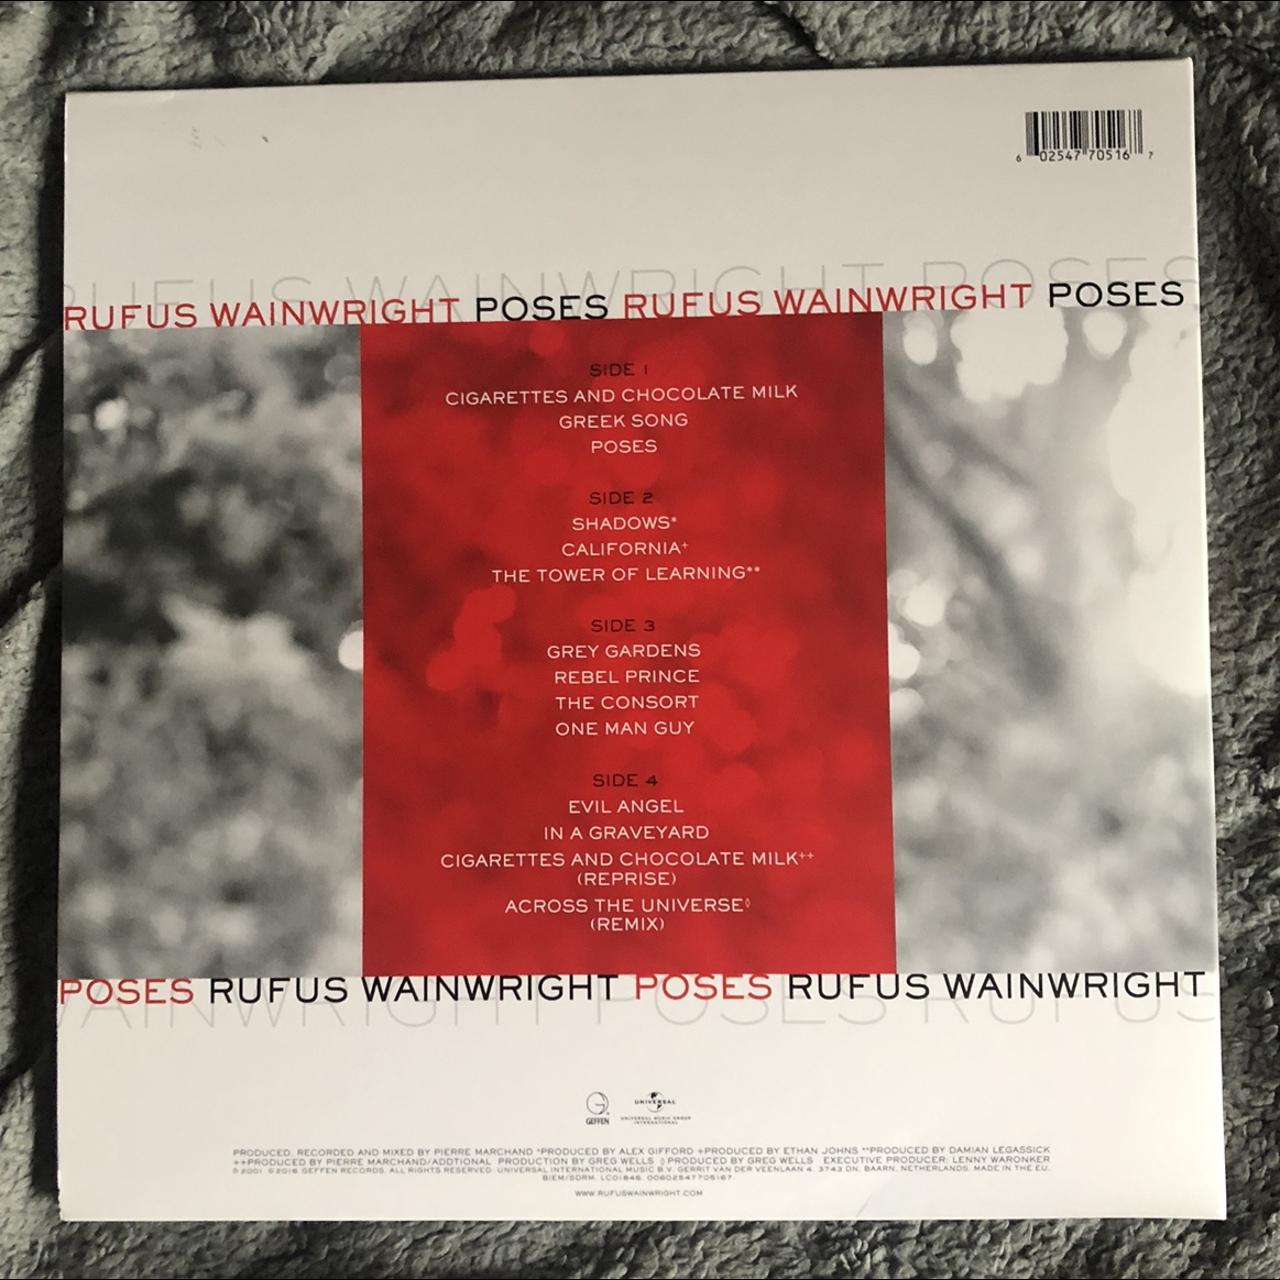 RUFUS WAINWRIGHT - ALL THESE POSES LIVE: REVIEW